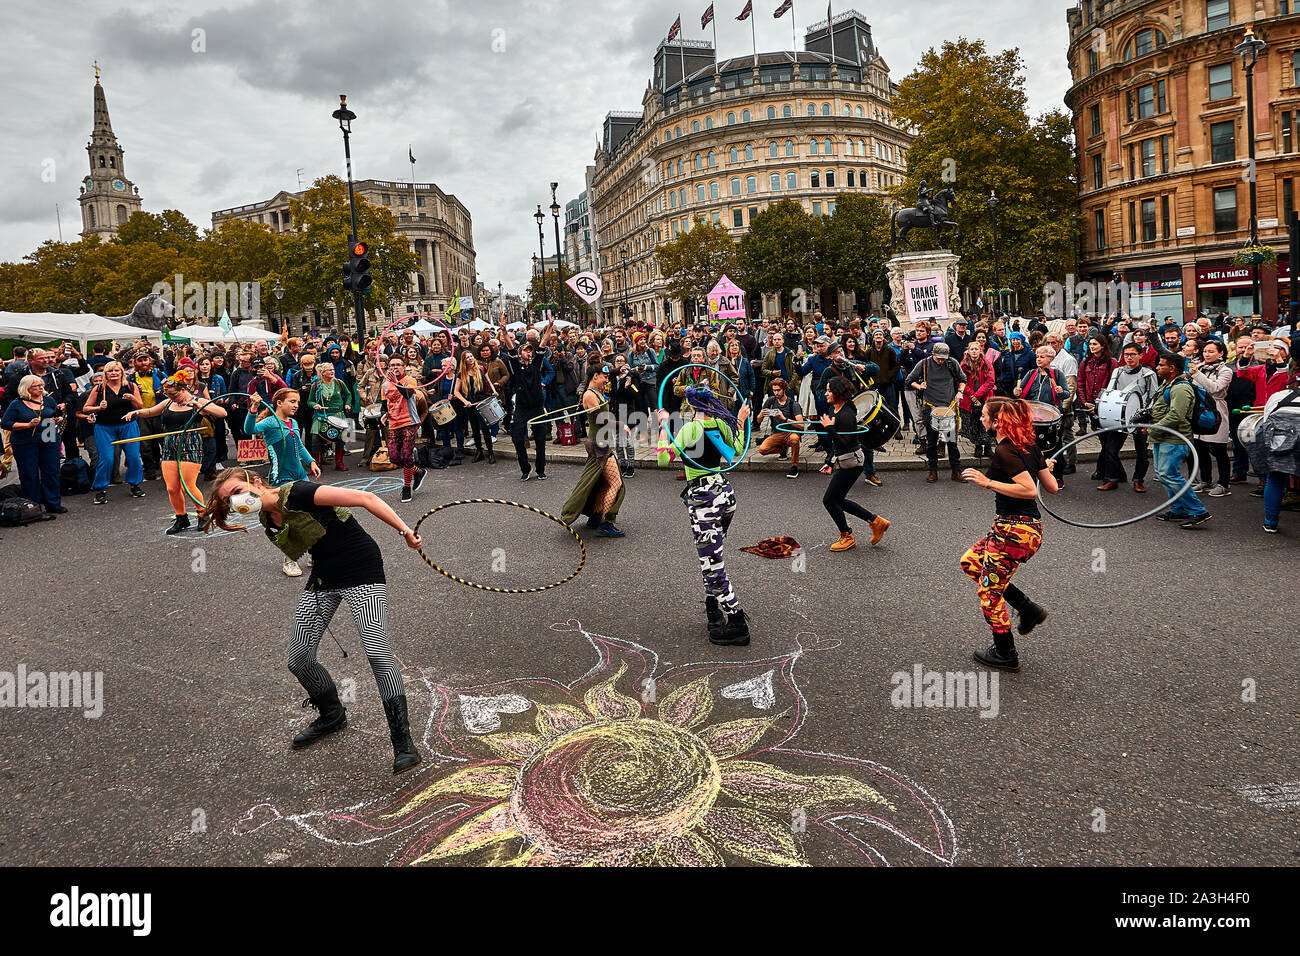 London, U.K. - Oct 8, 2019: Hula-hoop dancers make an impromptu  display on the second day of an occupation of Trafalgar Square by campaigners from Extinction Rebellion. Stock Photo